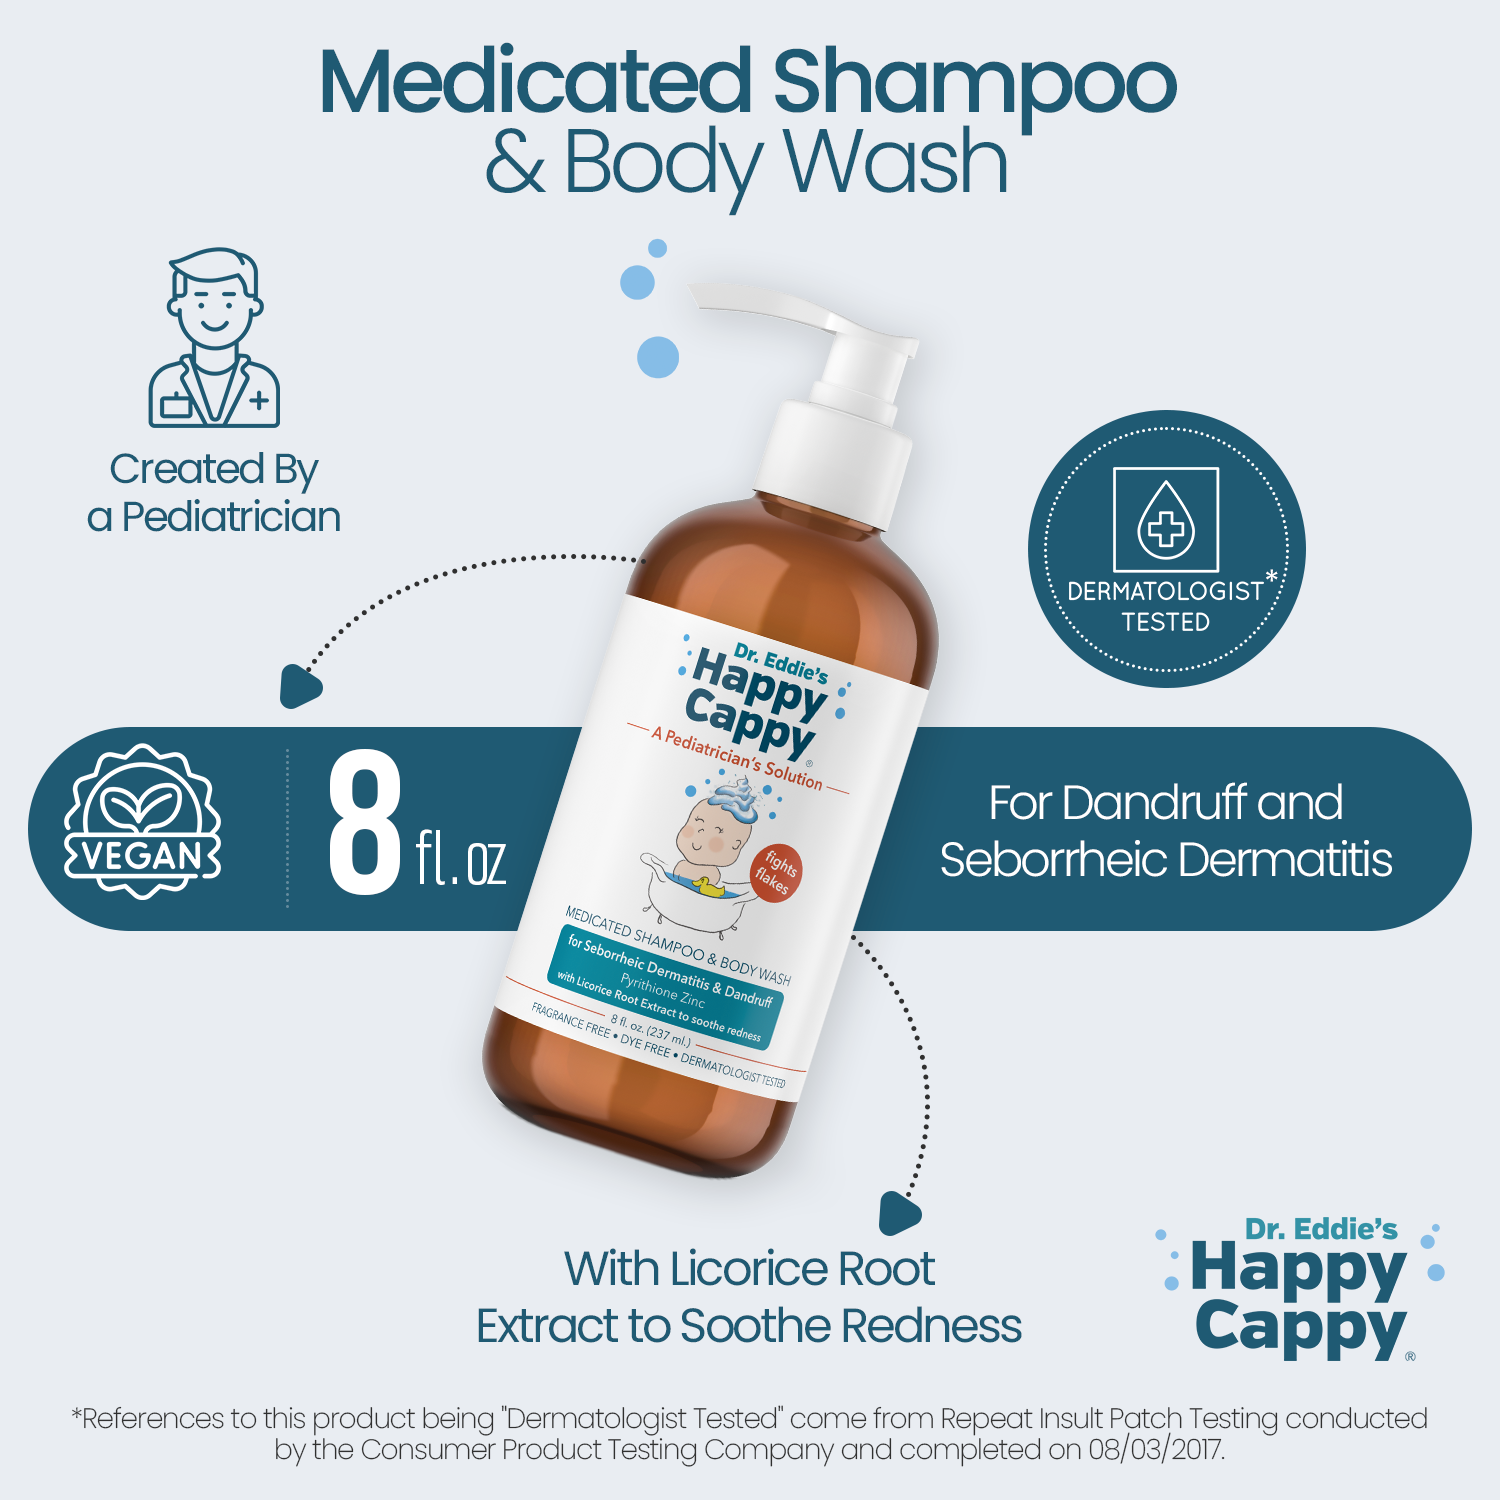 Wholesale 8oz Dr. Eddie's Happy Cappy Medicated Shampoo for your 